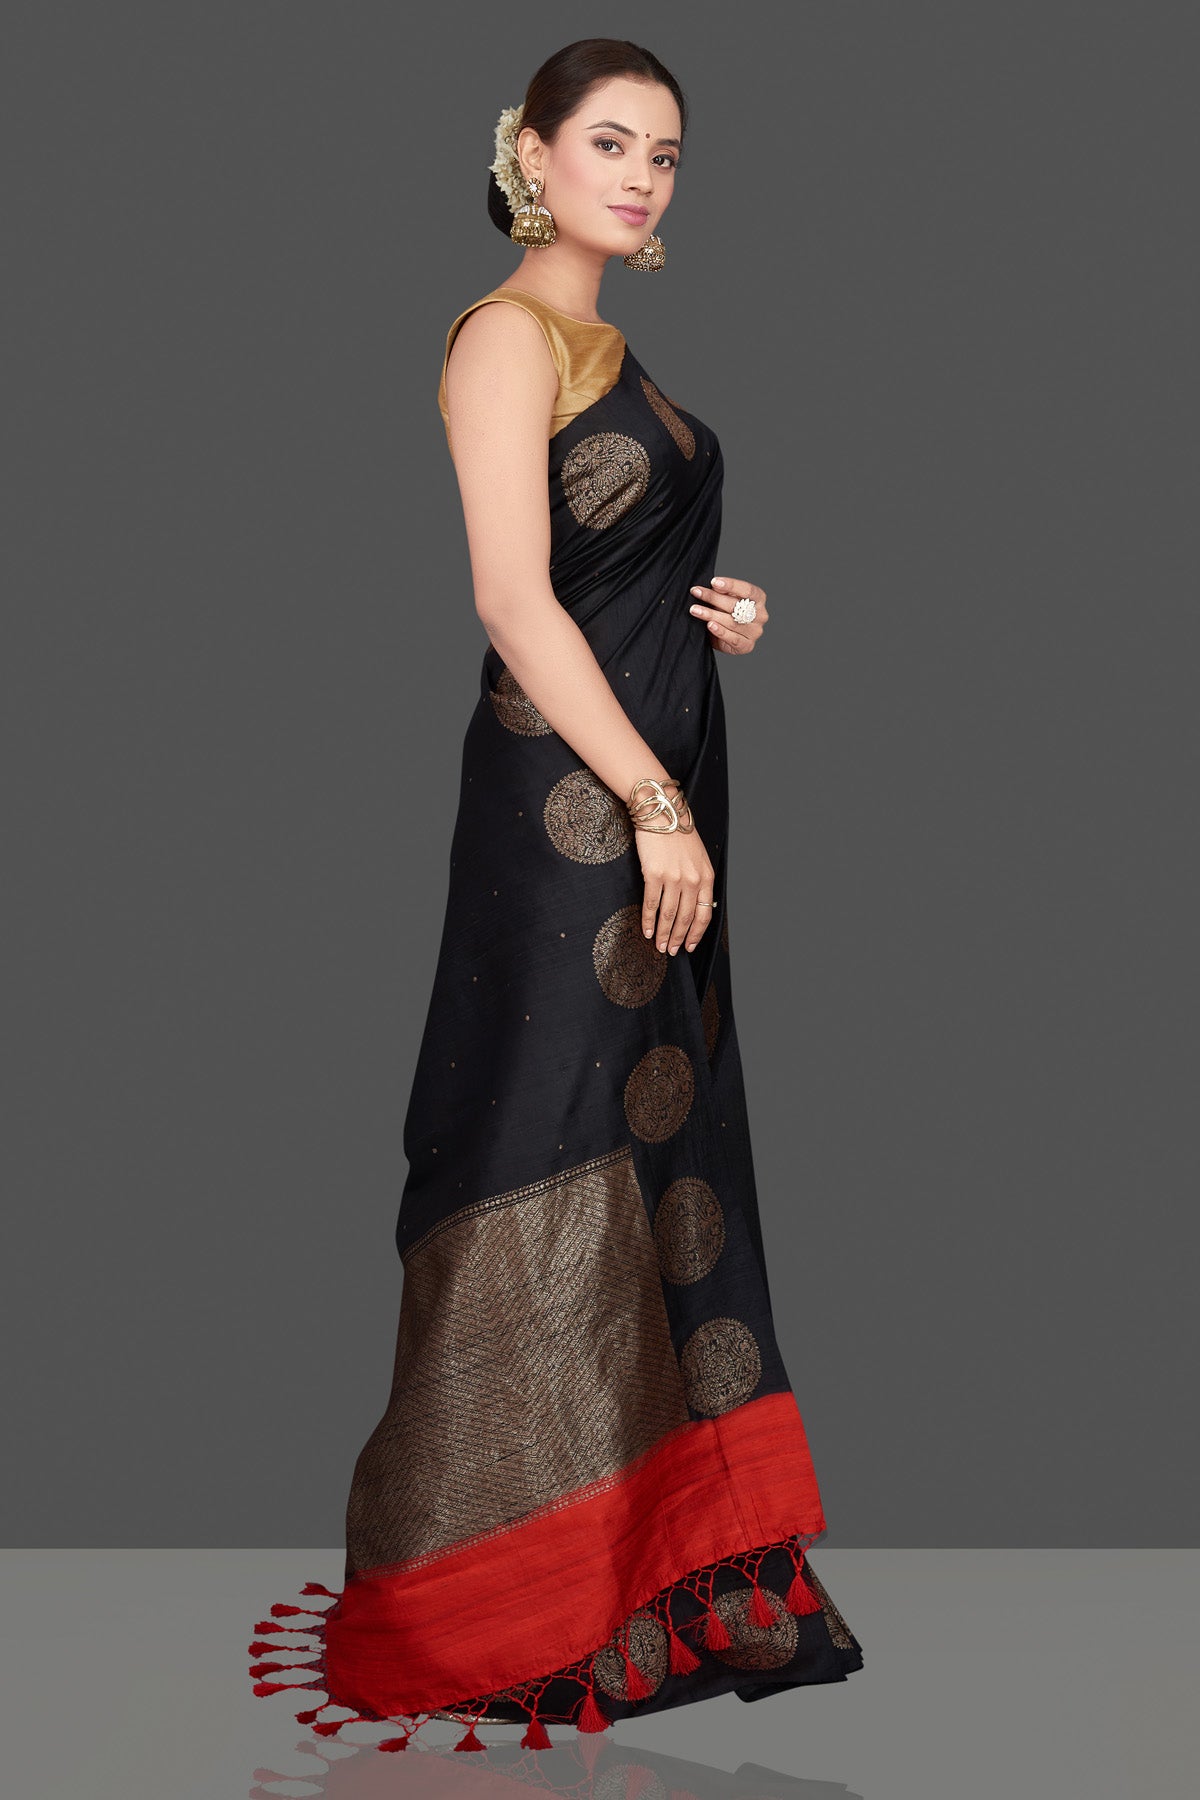 Buy ravishing black tussar Benarasi saree online in USA with antique zari buta border. Go for stunning Indian designer sarees, georgette sarees, handwoven saris, embroidered sarees for festive occasions and weddings from Pure Elegance Indian clothing store in USA.-side